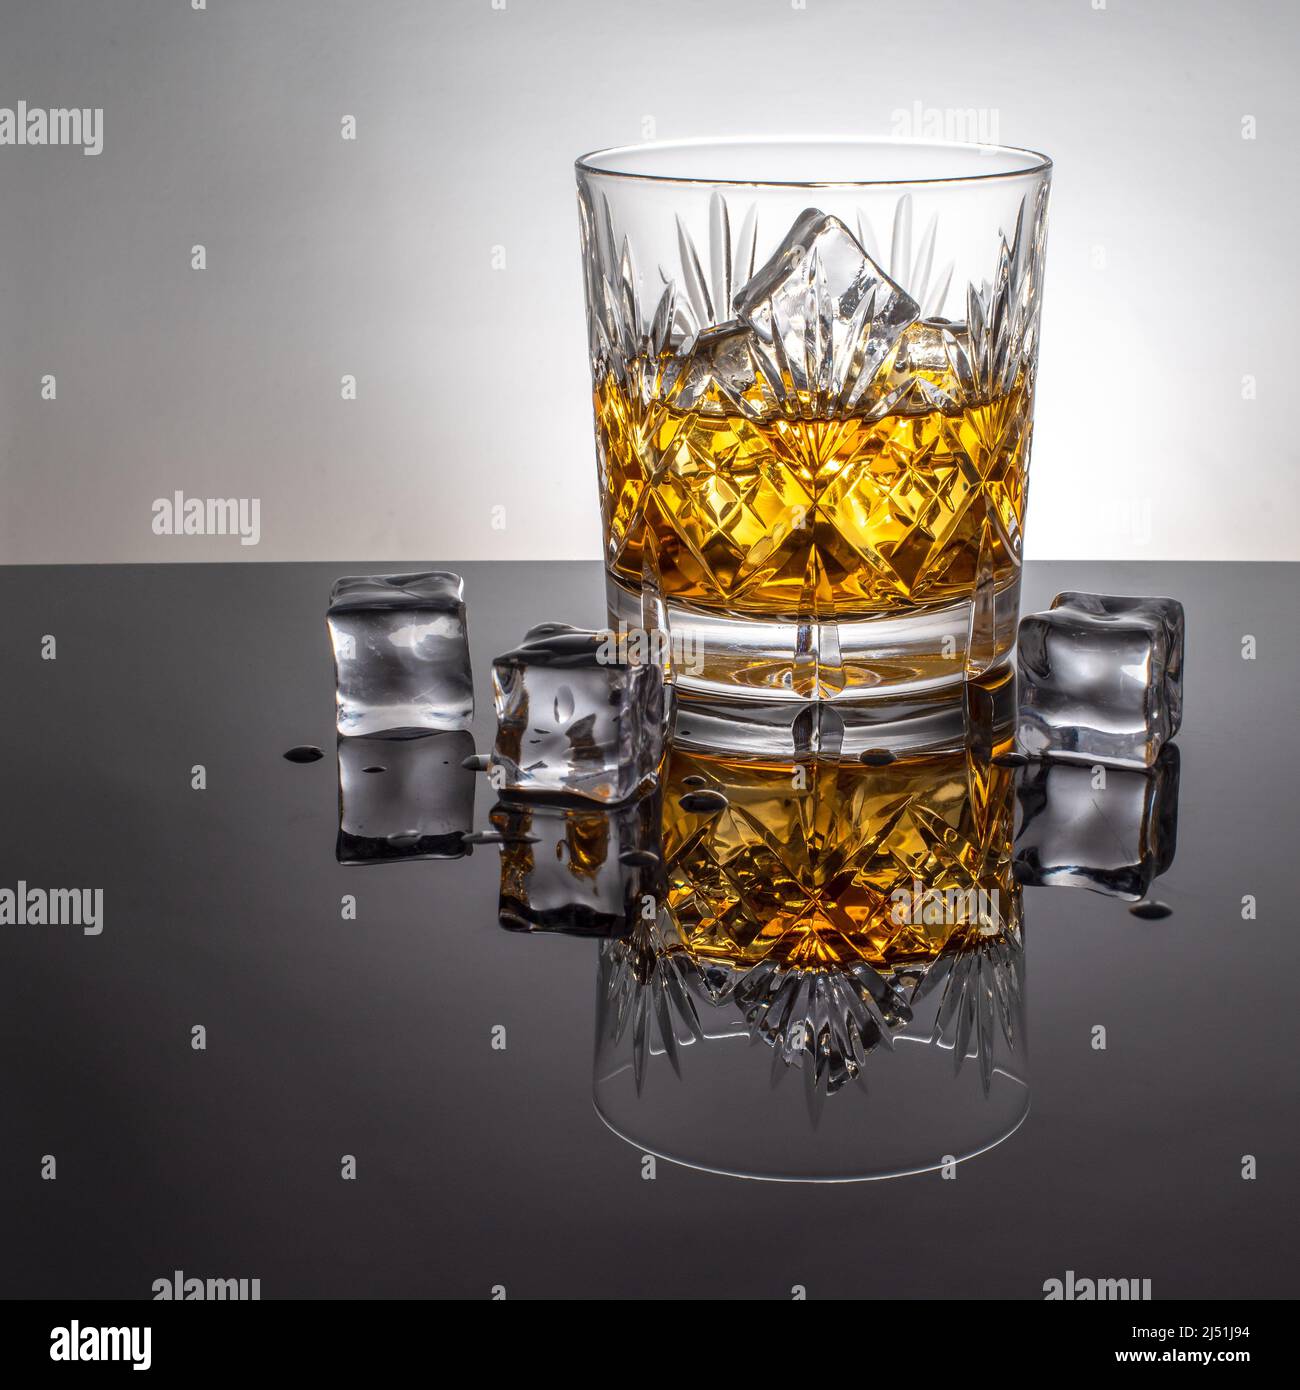 Glass of whisky with ice, backlit on a reflective black foreground in a cut glass tumbler. Stock Photo